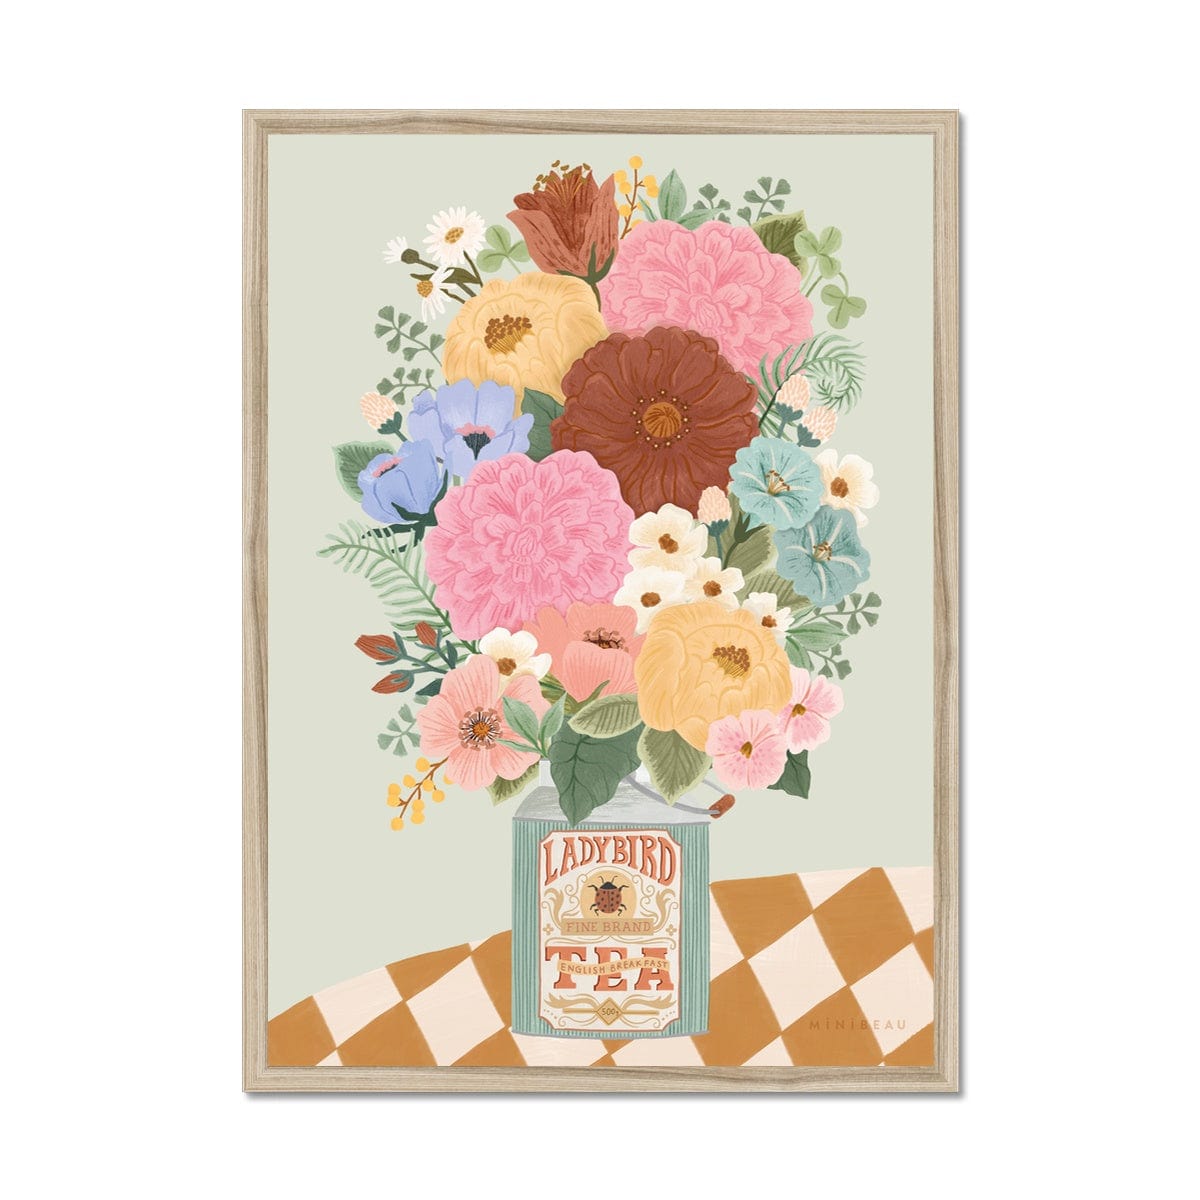 Art print in a natural wood frame. Our boho floral art print consists of a bunch of flowers and foliage in a vintage square ladybird tea bottle on a table with a checked tablecloth on a light green background. The flowers are of varying types and come in shades of red, pink, purple, blue, yellow and cream.